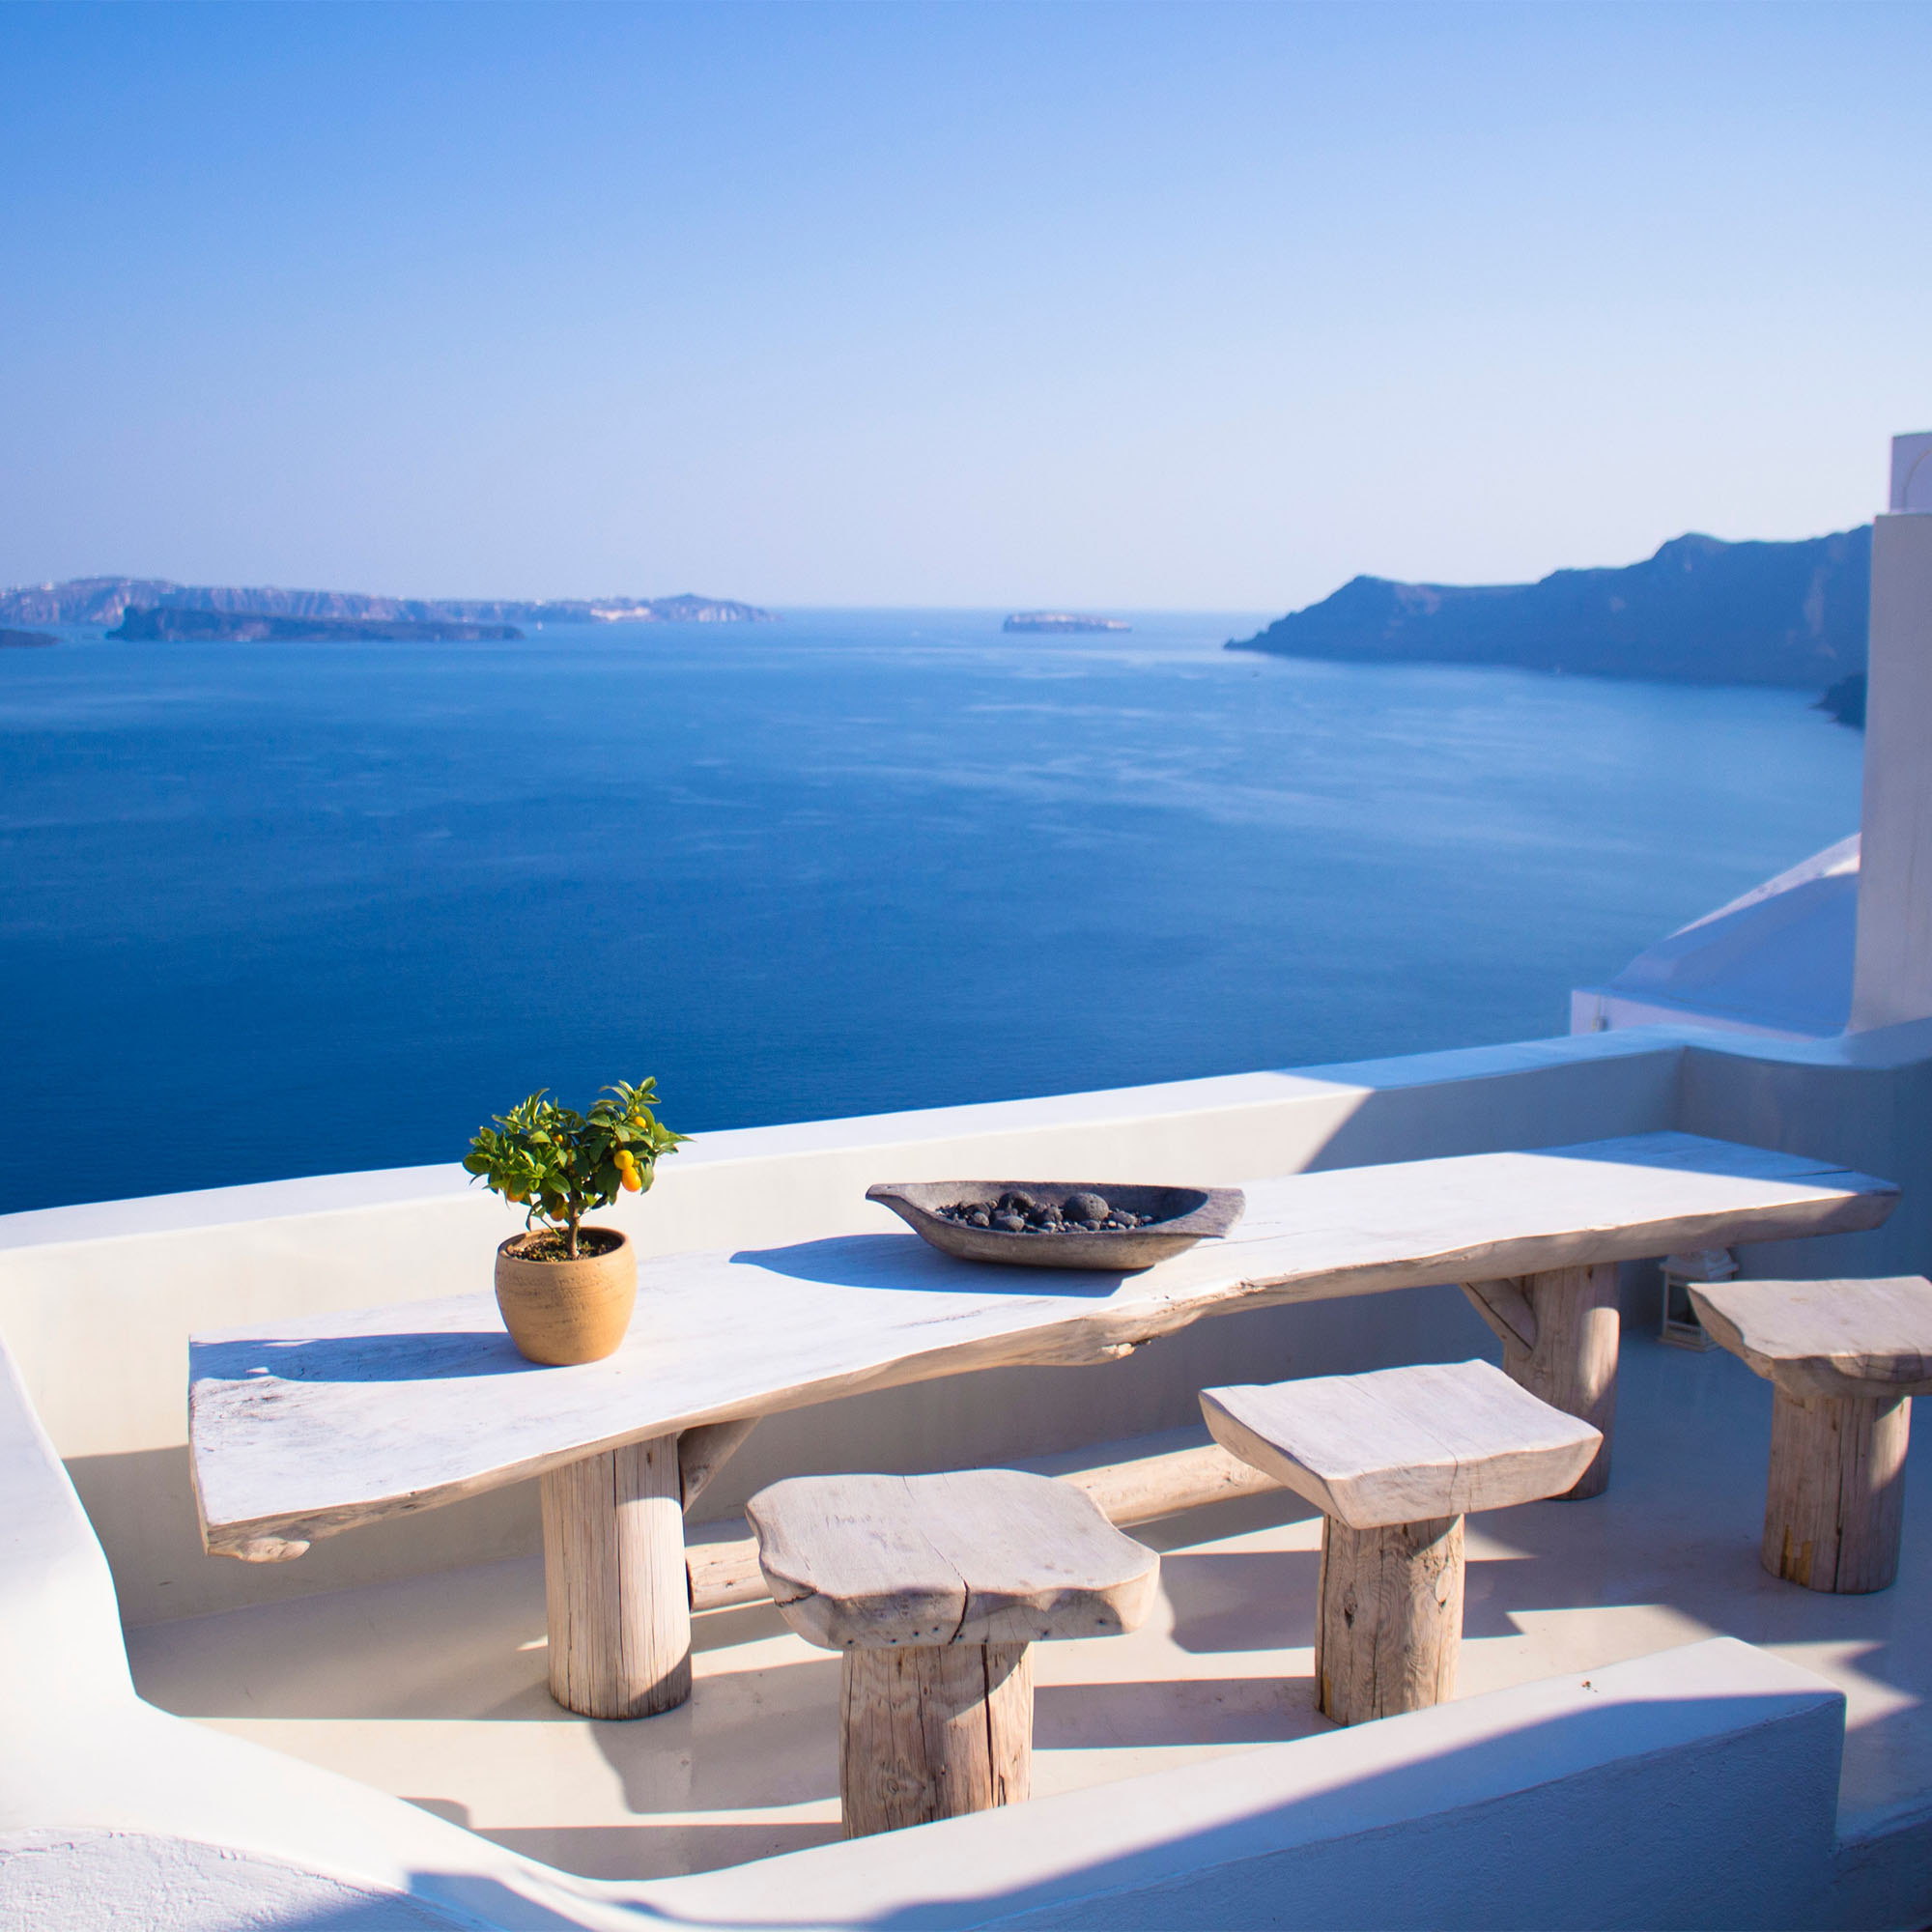 image of a rustic table and chairs overlooking the ocean in Santorini